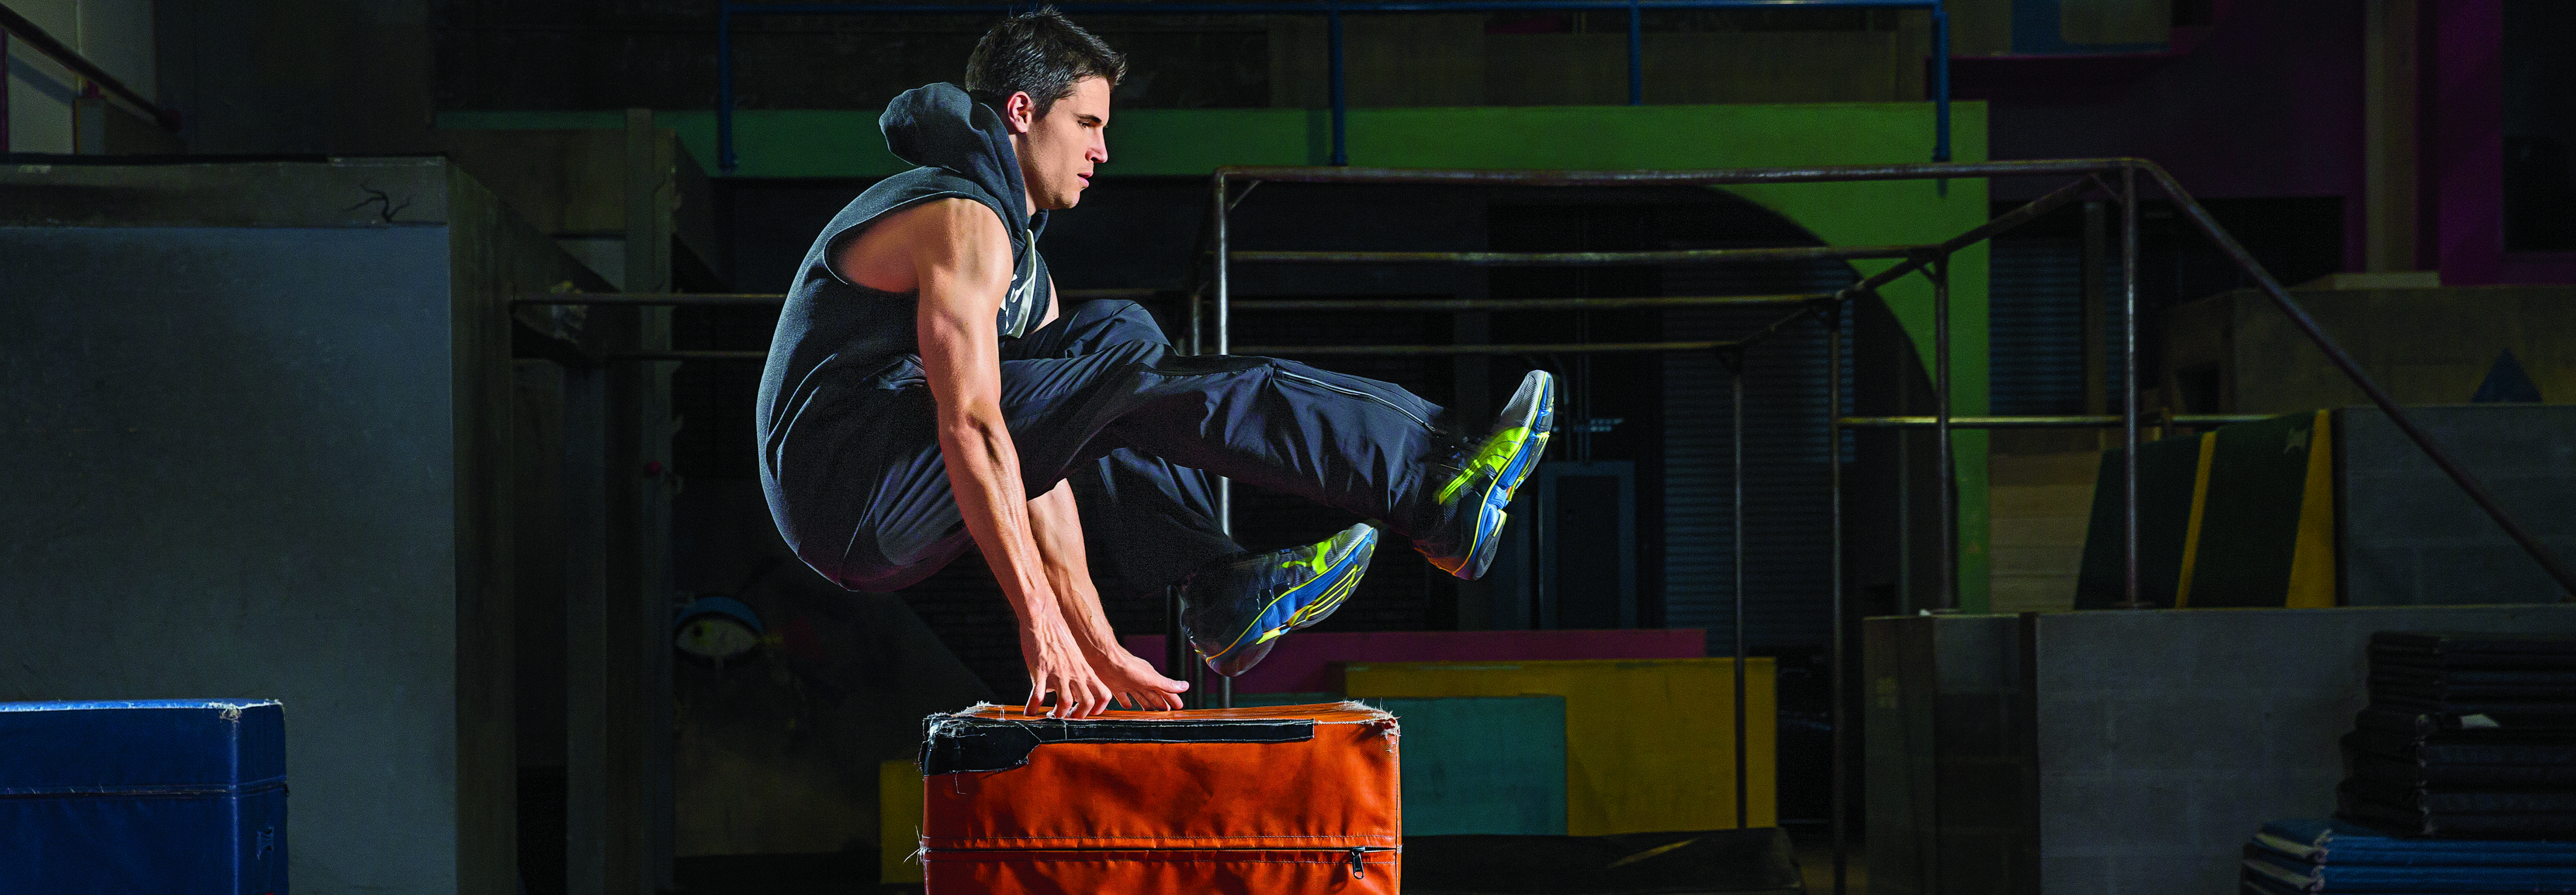 Robbie Amell Soars With These Flashy Techniques | Muscle & Fitness.